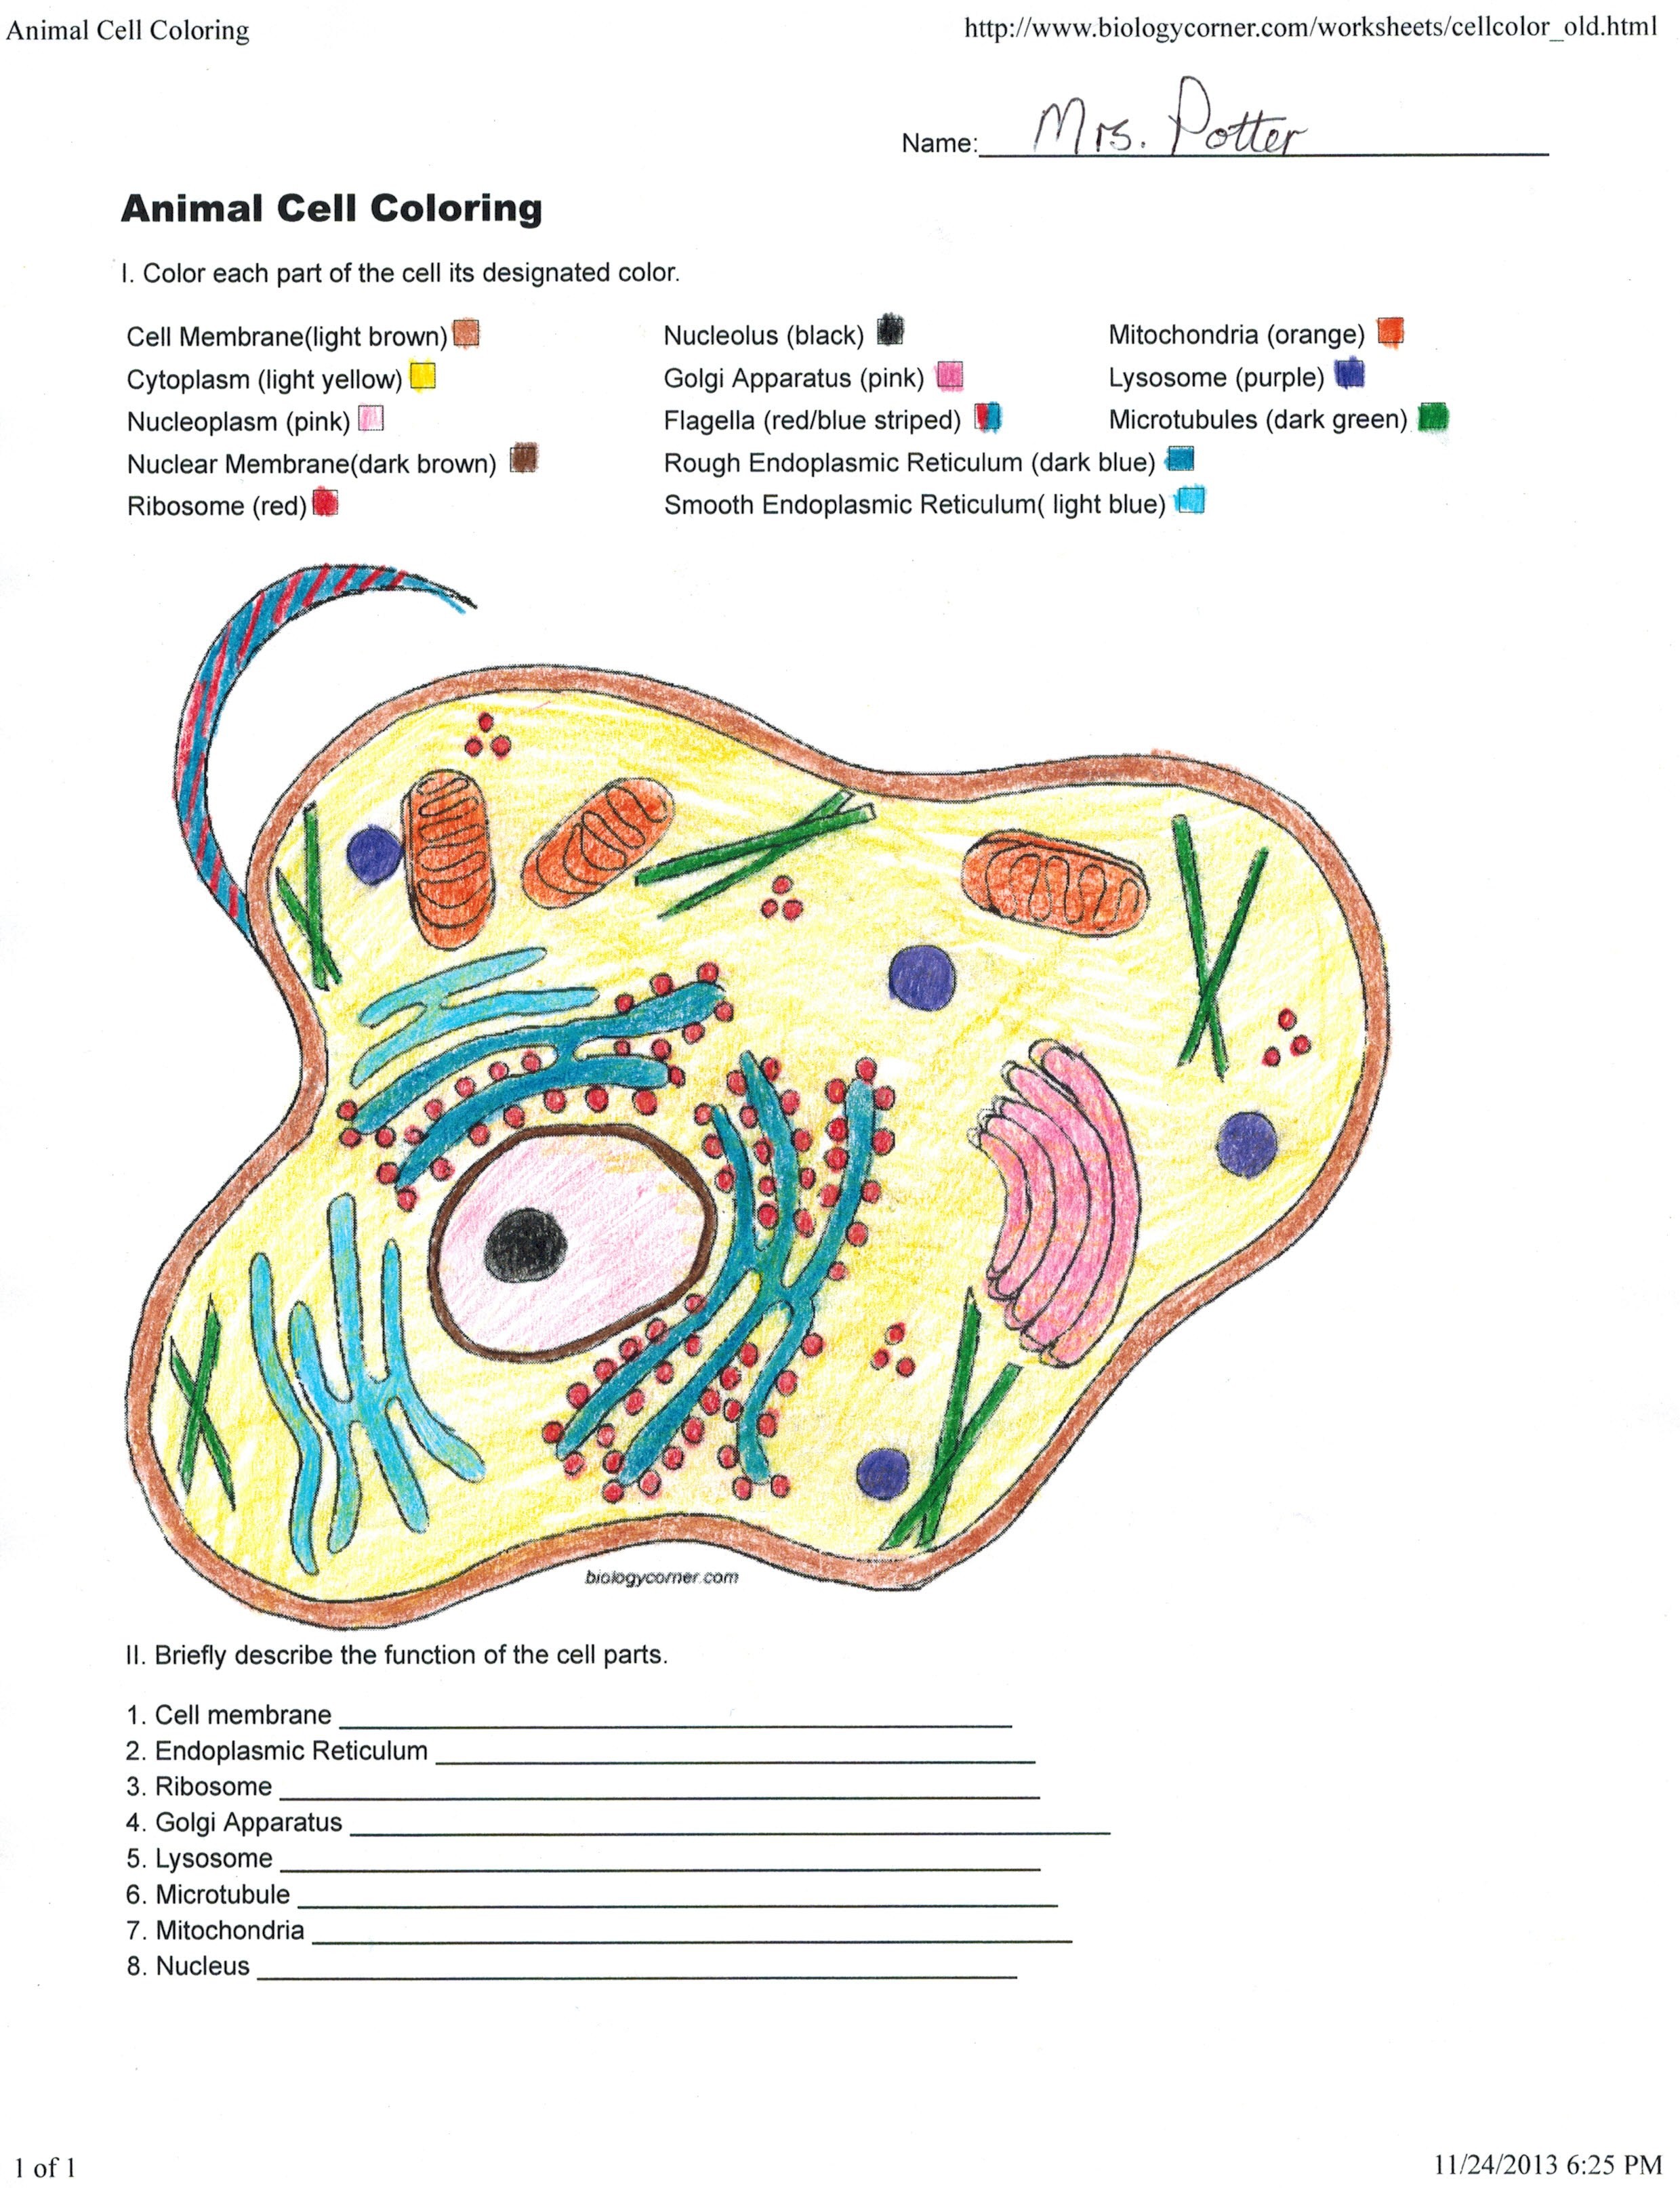 Animal Cell Coloring Labeled Coloring Pages For Children